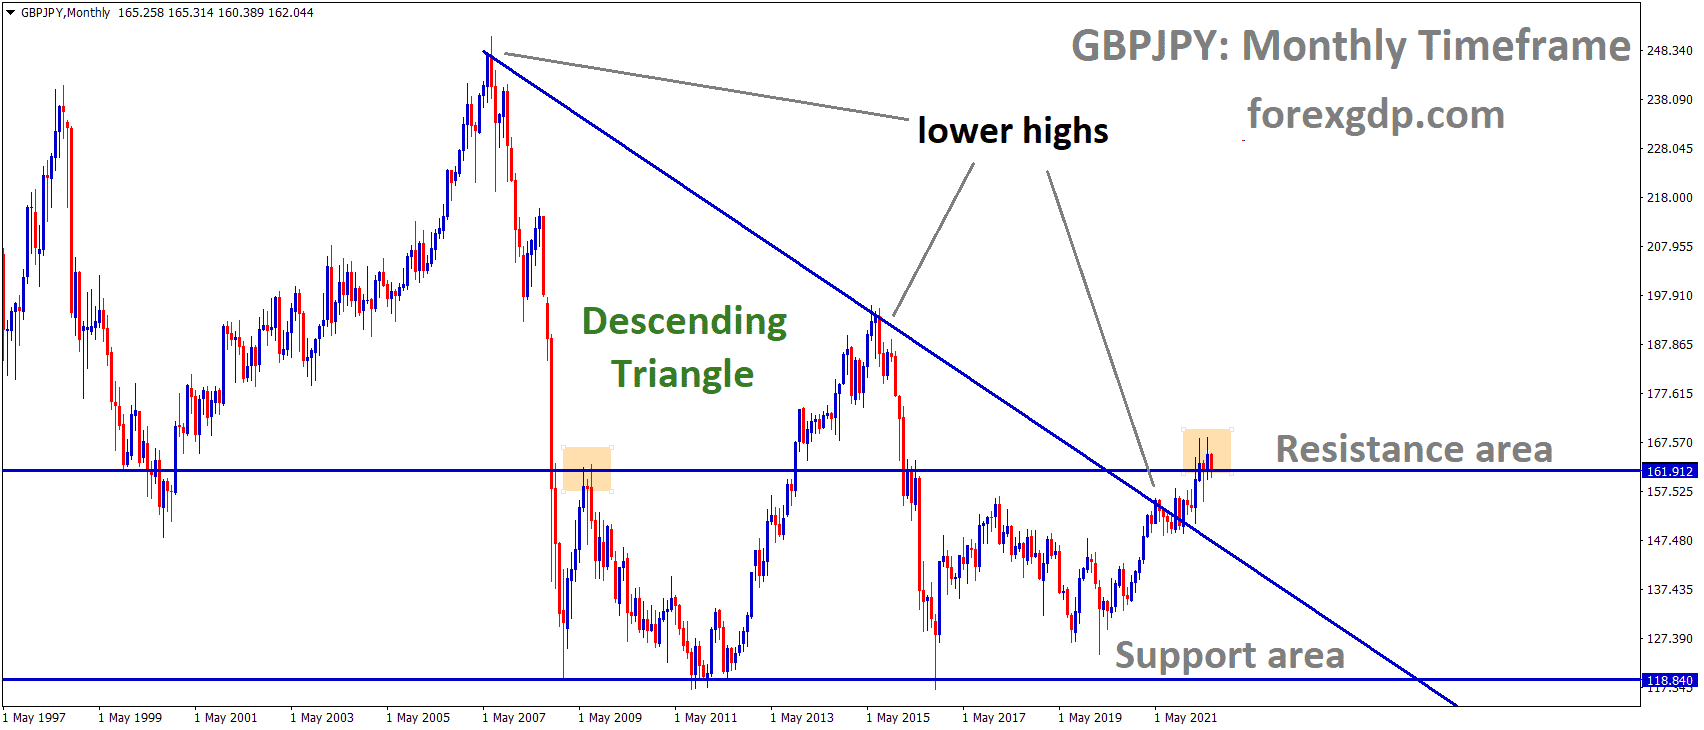 GBPJPY Monthly Time Frame Analysis Market is moving in the Descending triangle pattern and the Market has reached the Horizontal resistance area of the Pattern.